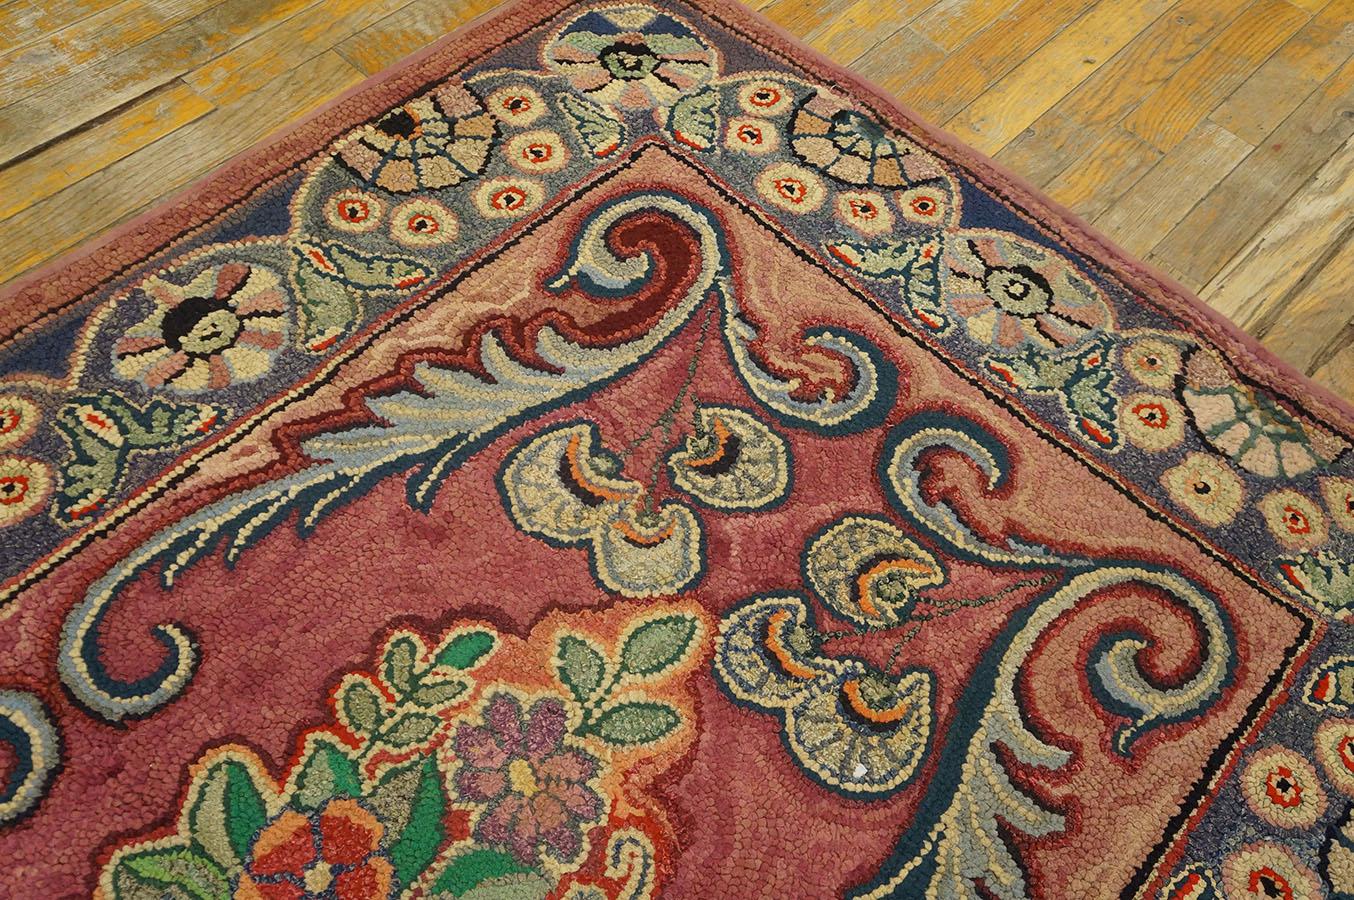 Antique American hooked rug, size: 3'10